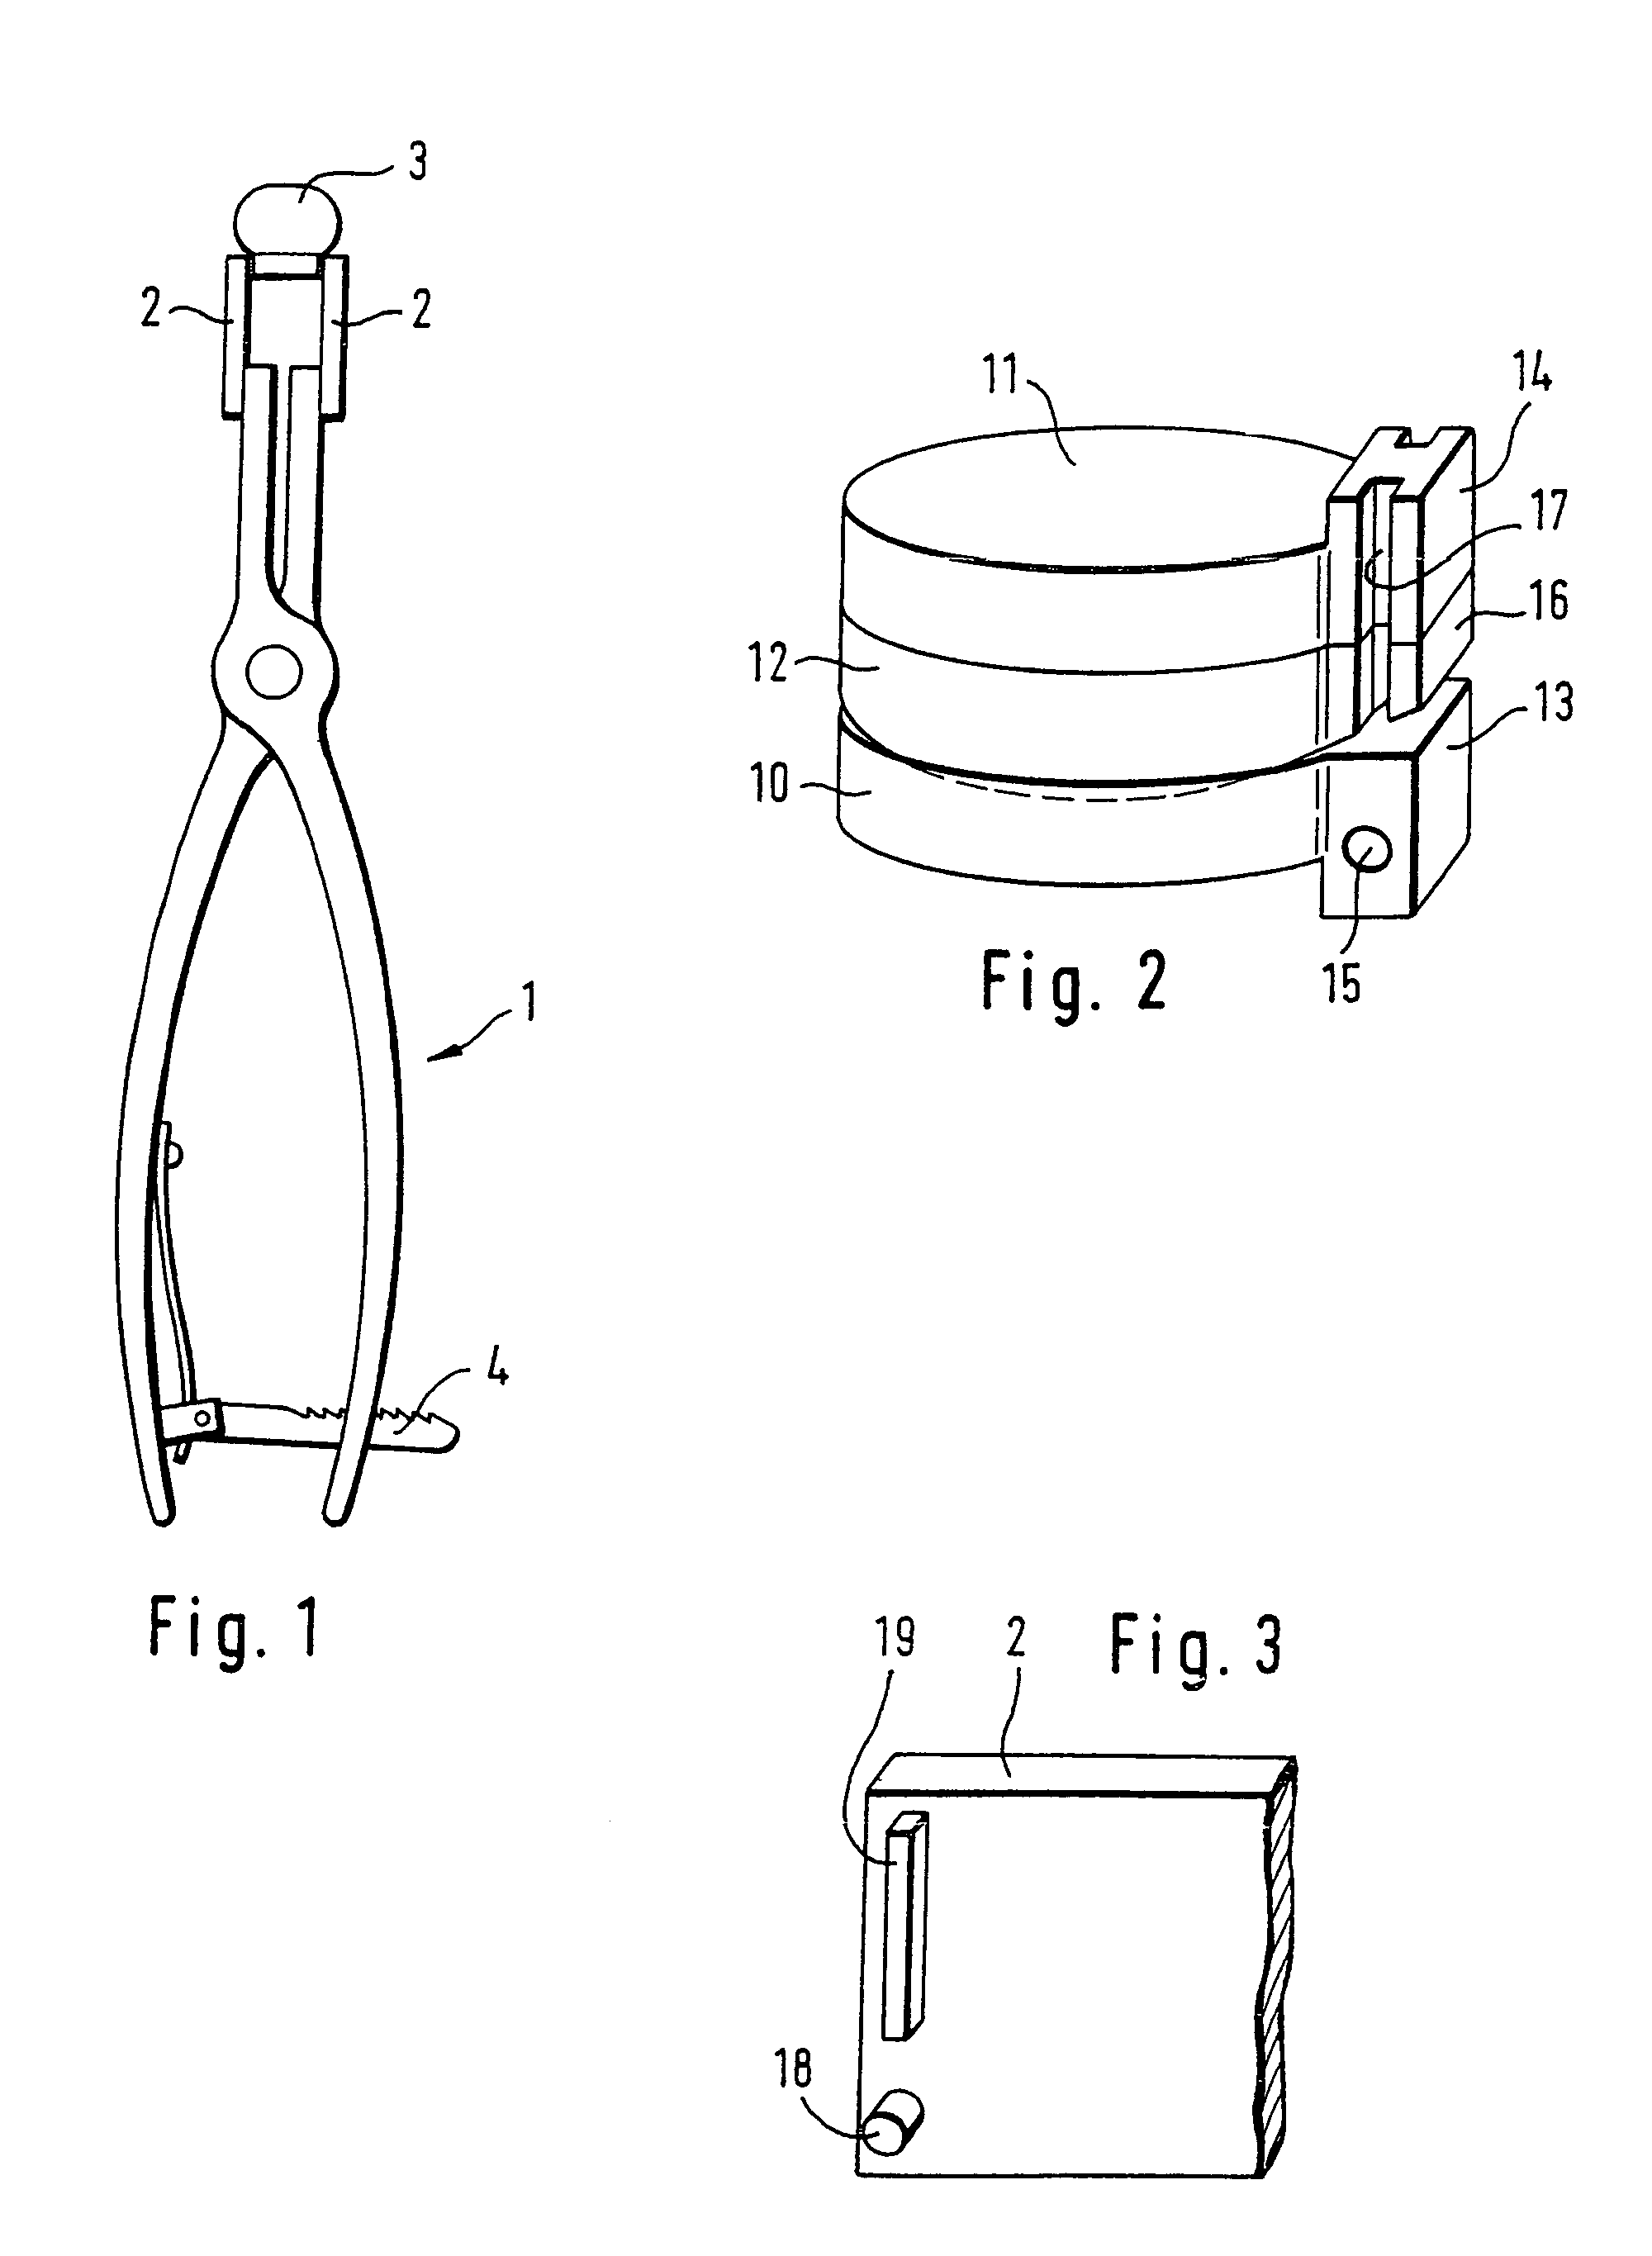 Cervical prosthesis with insertion instrument